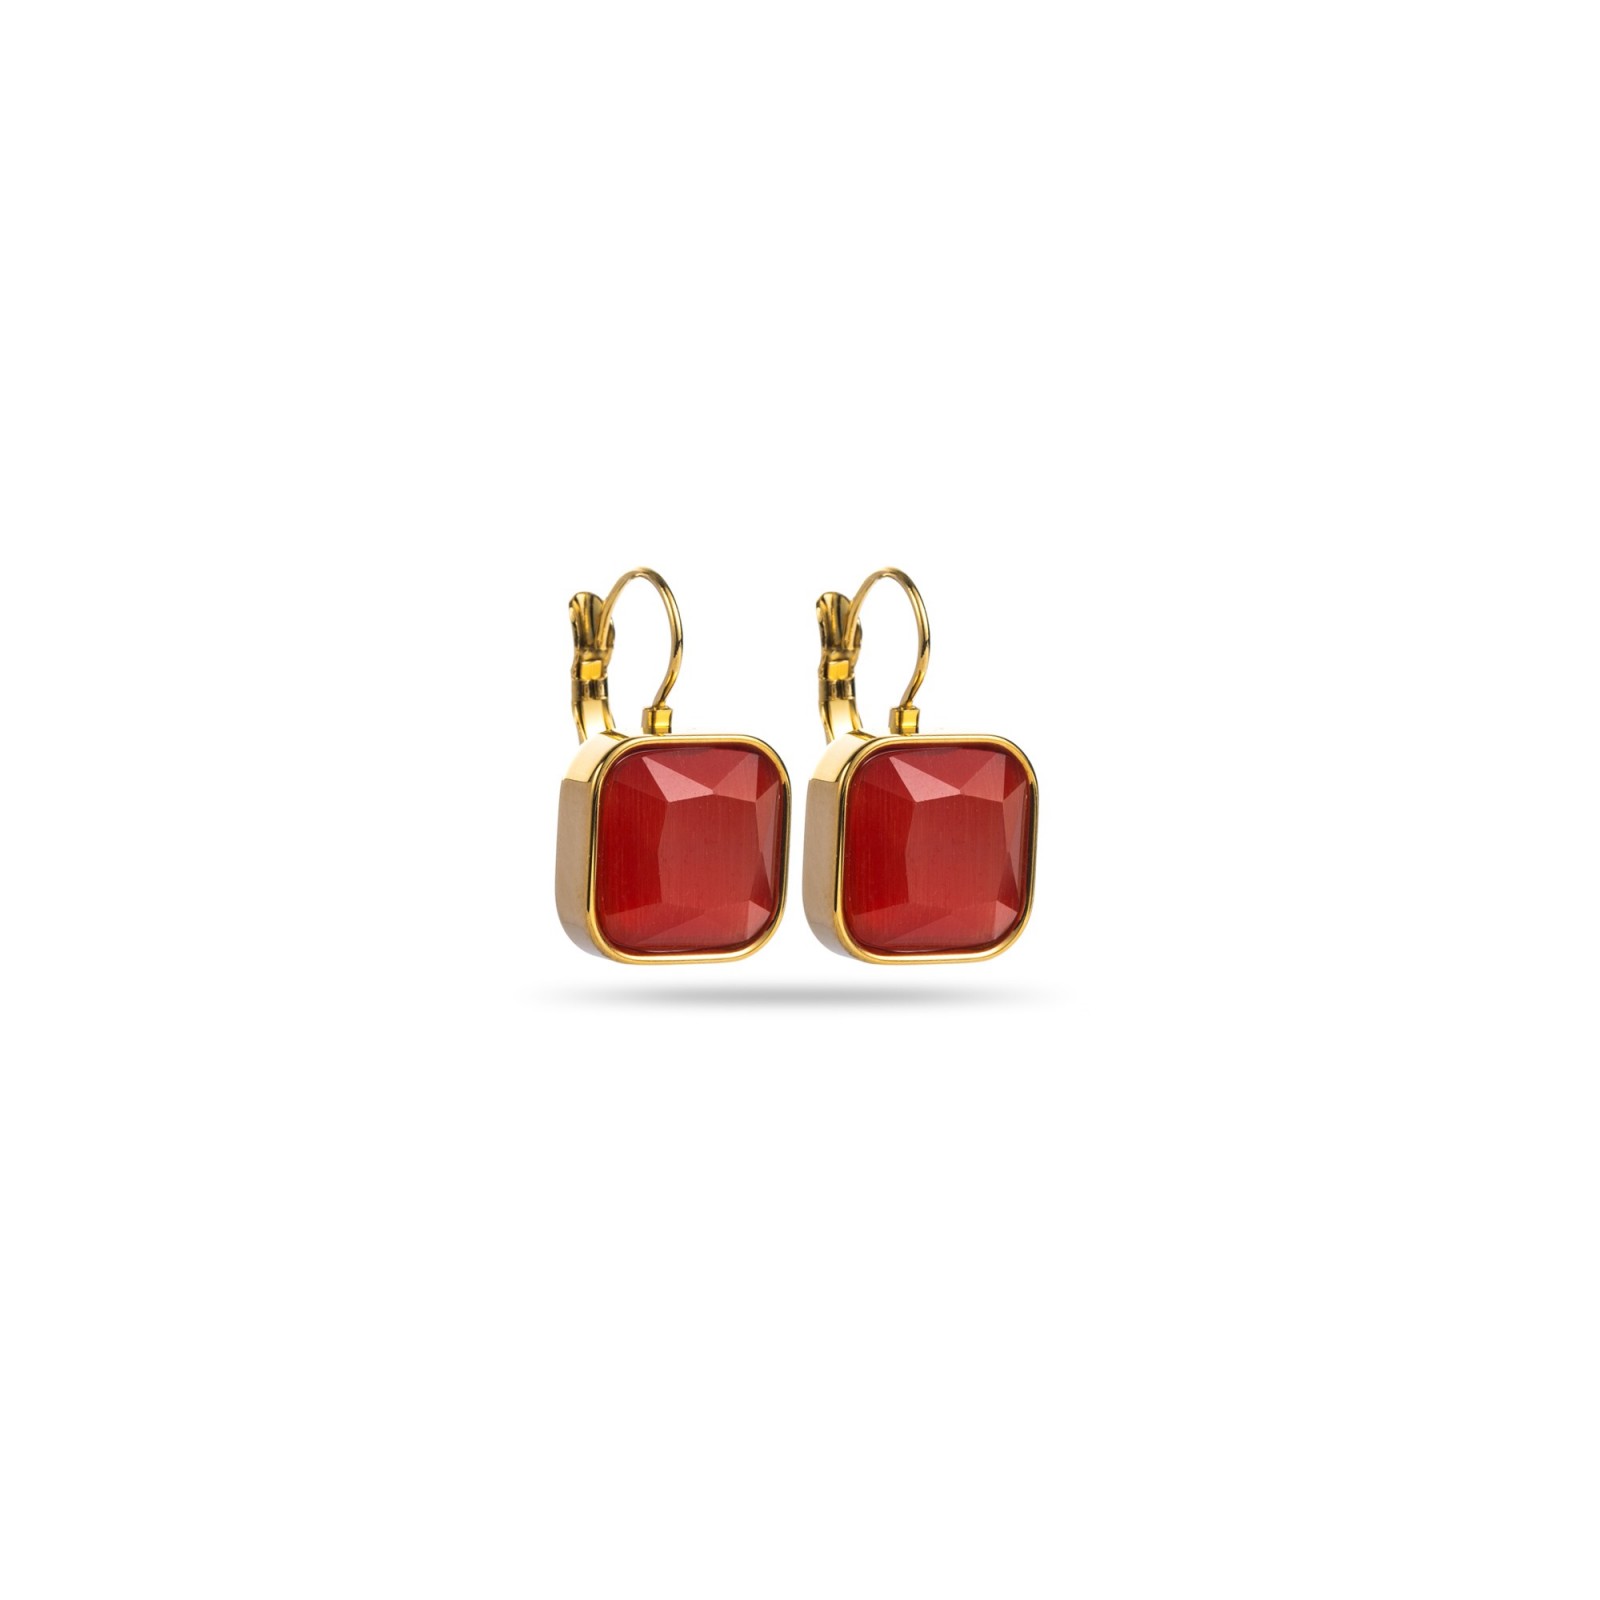 Colored Rhinestones Leverback Earrings Color:Red